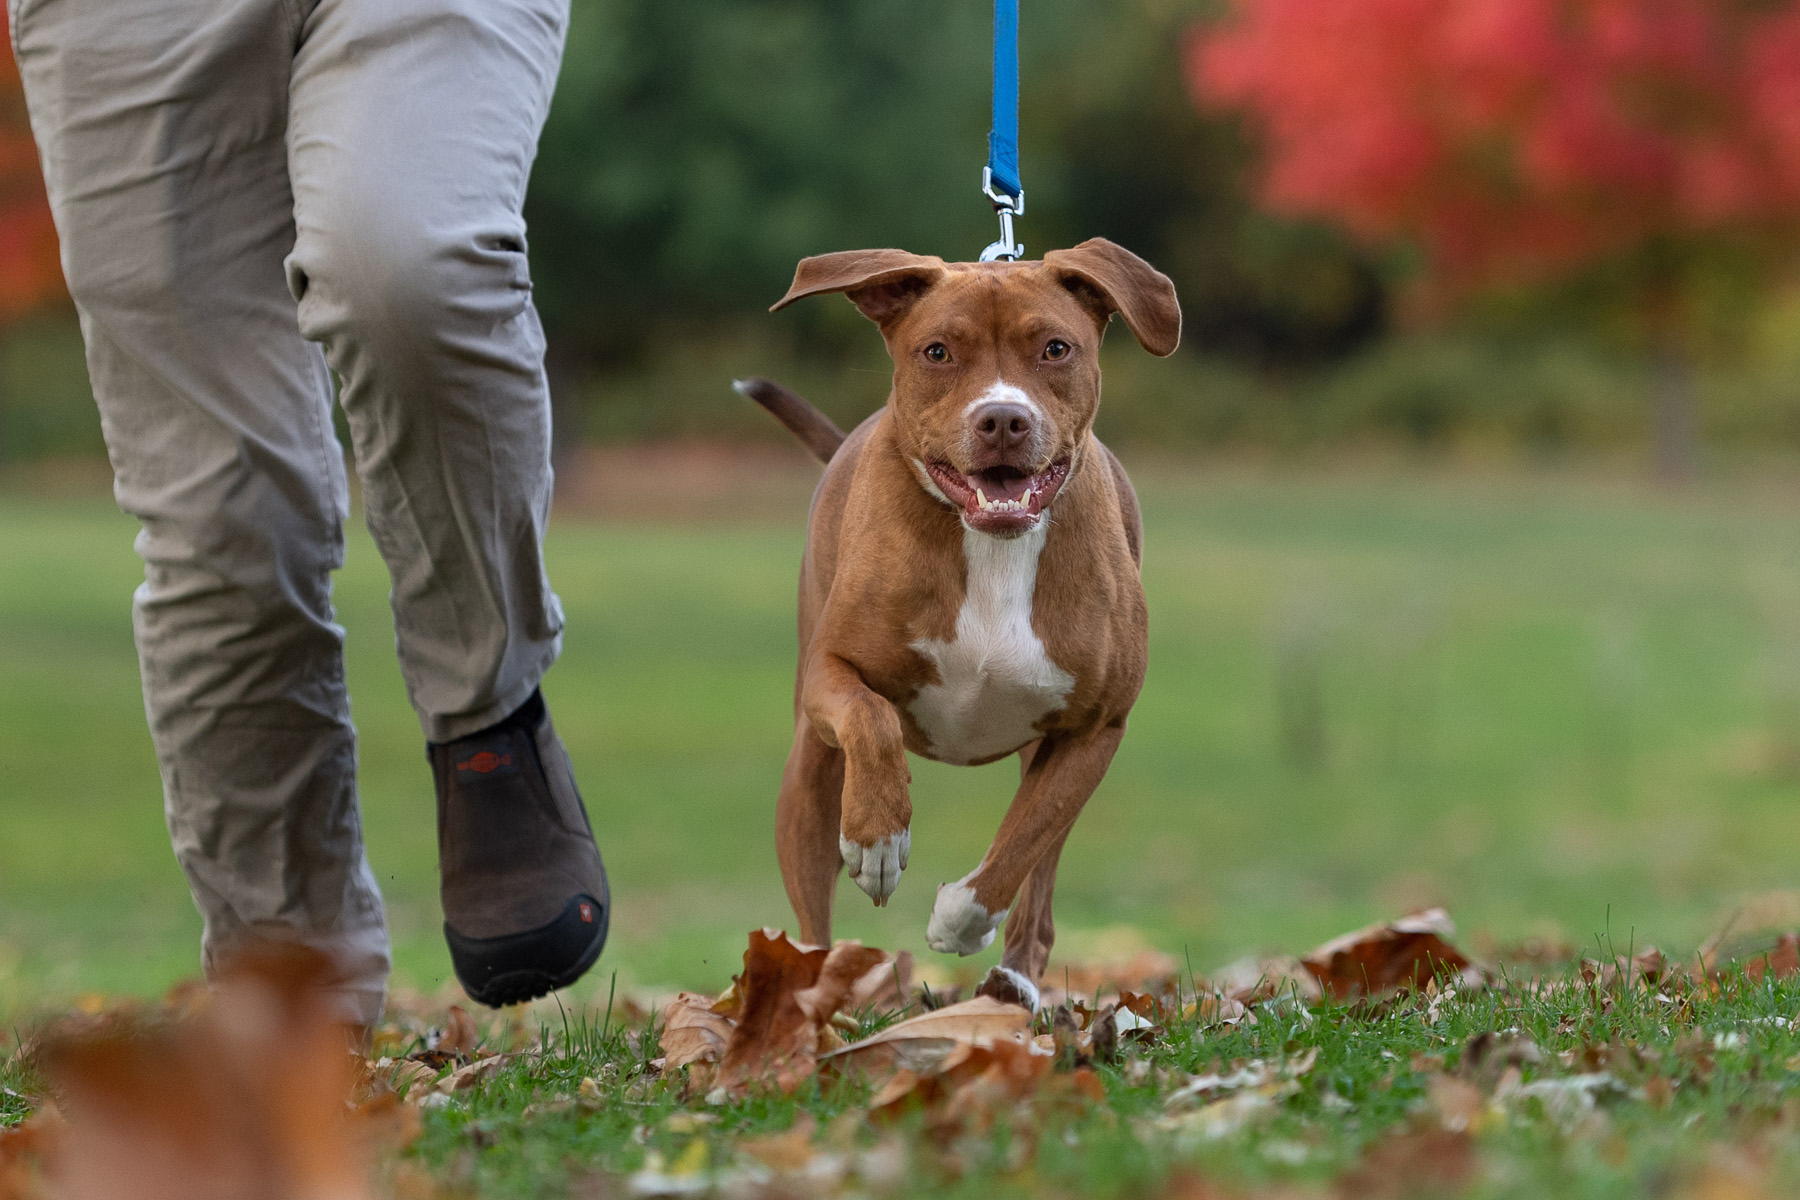 A pitbull mix running with her owner.